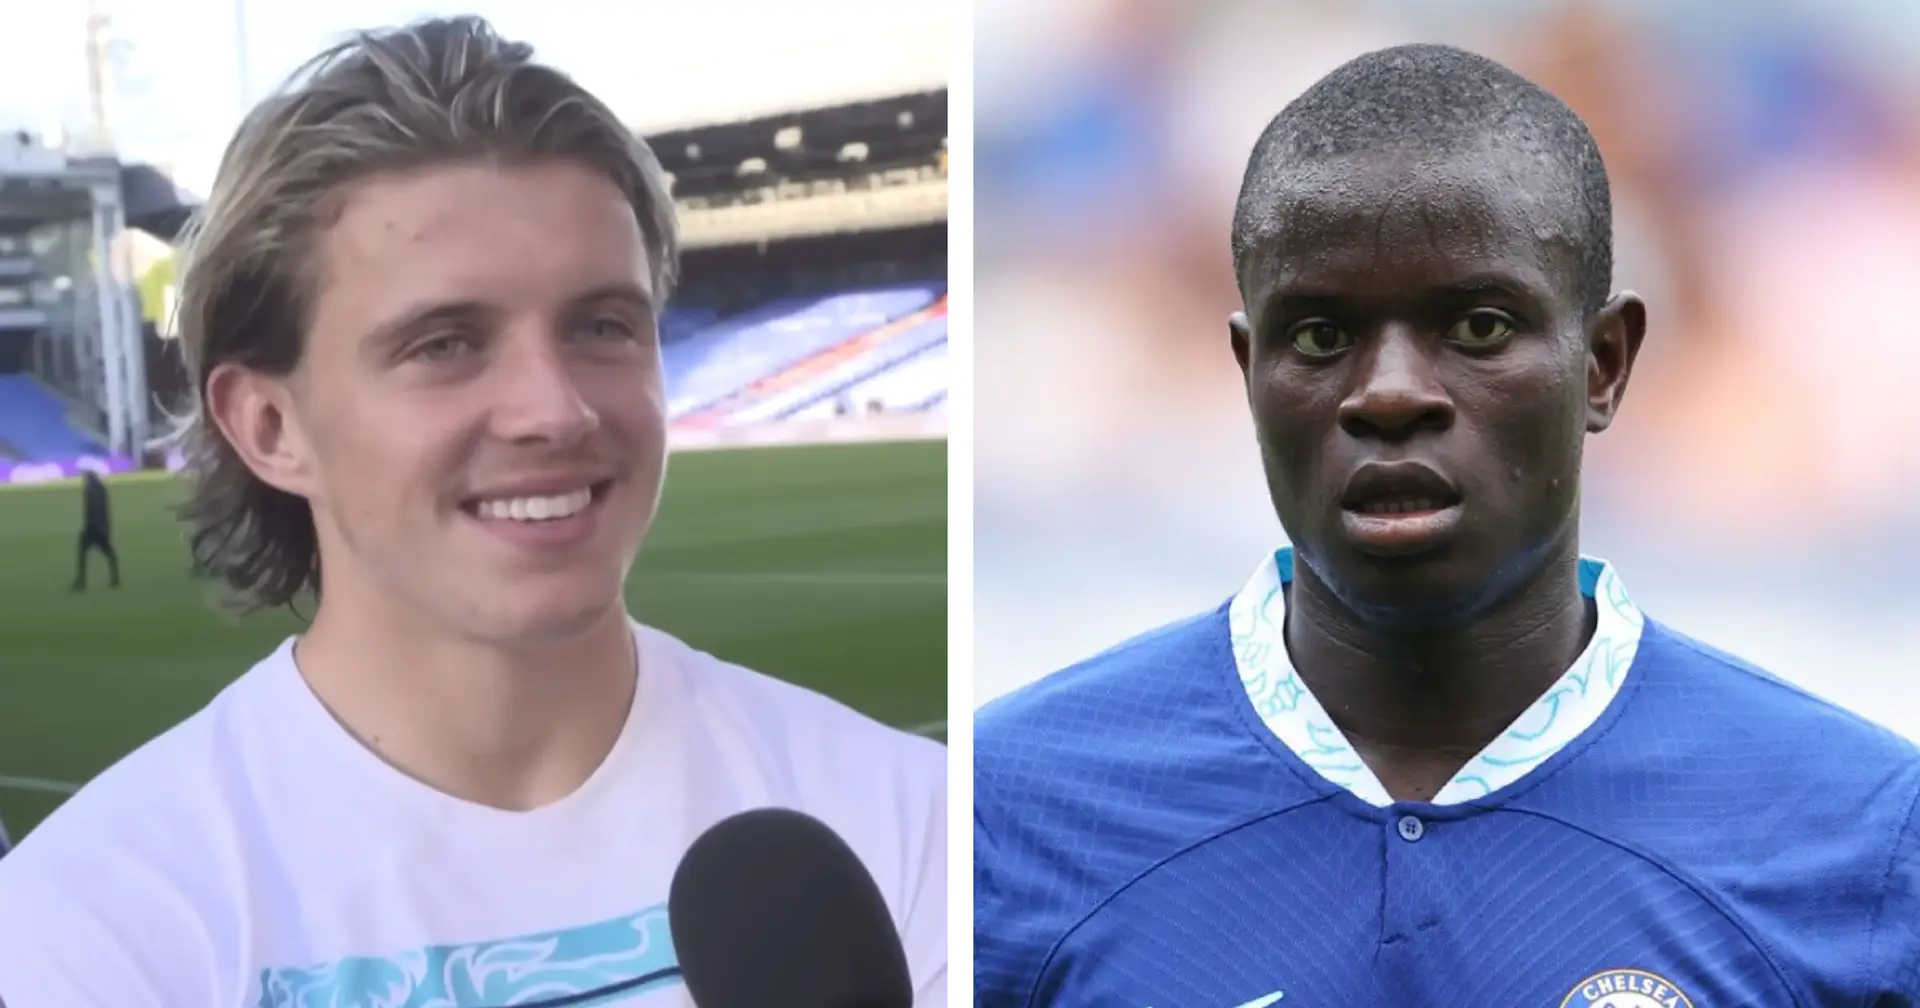 'I'm half the player': Gallagher laughs off Kante comparisons